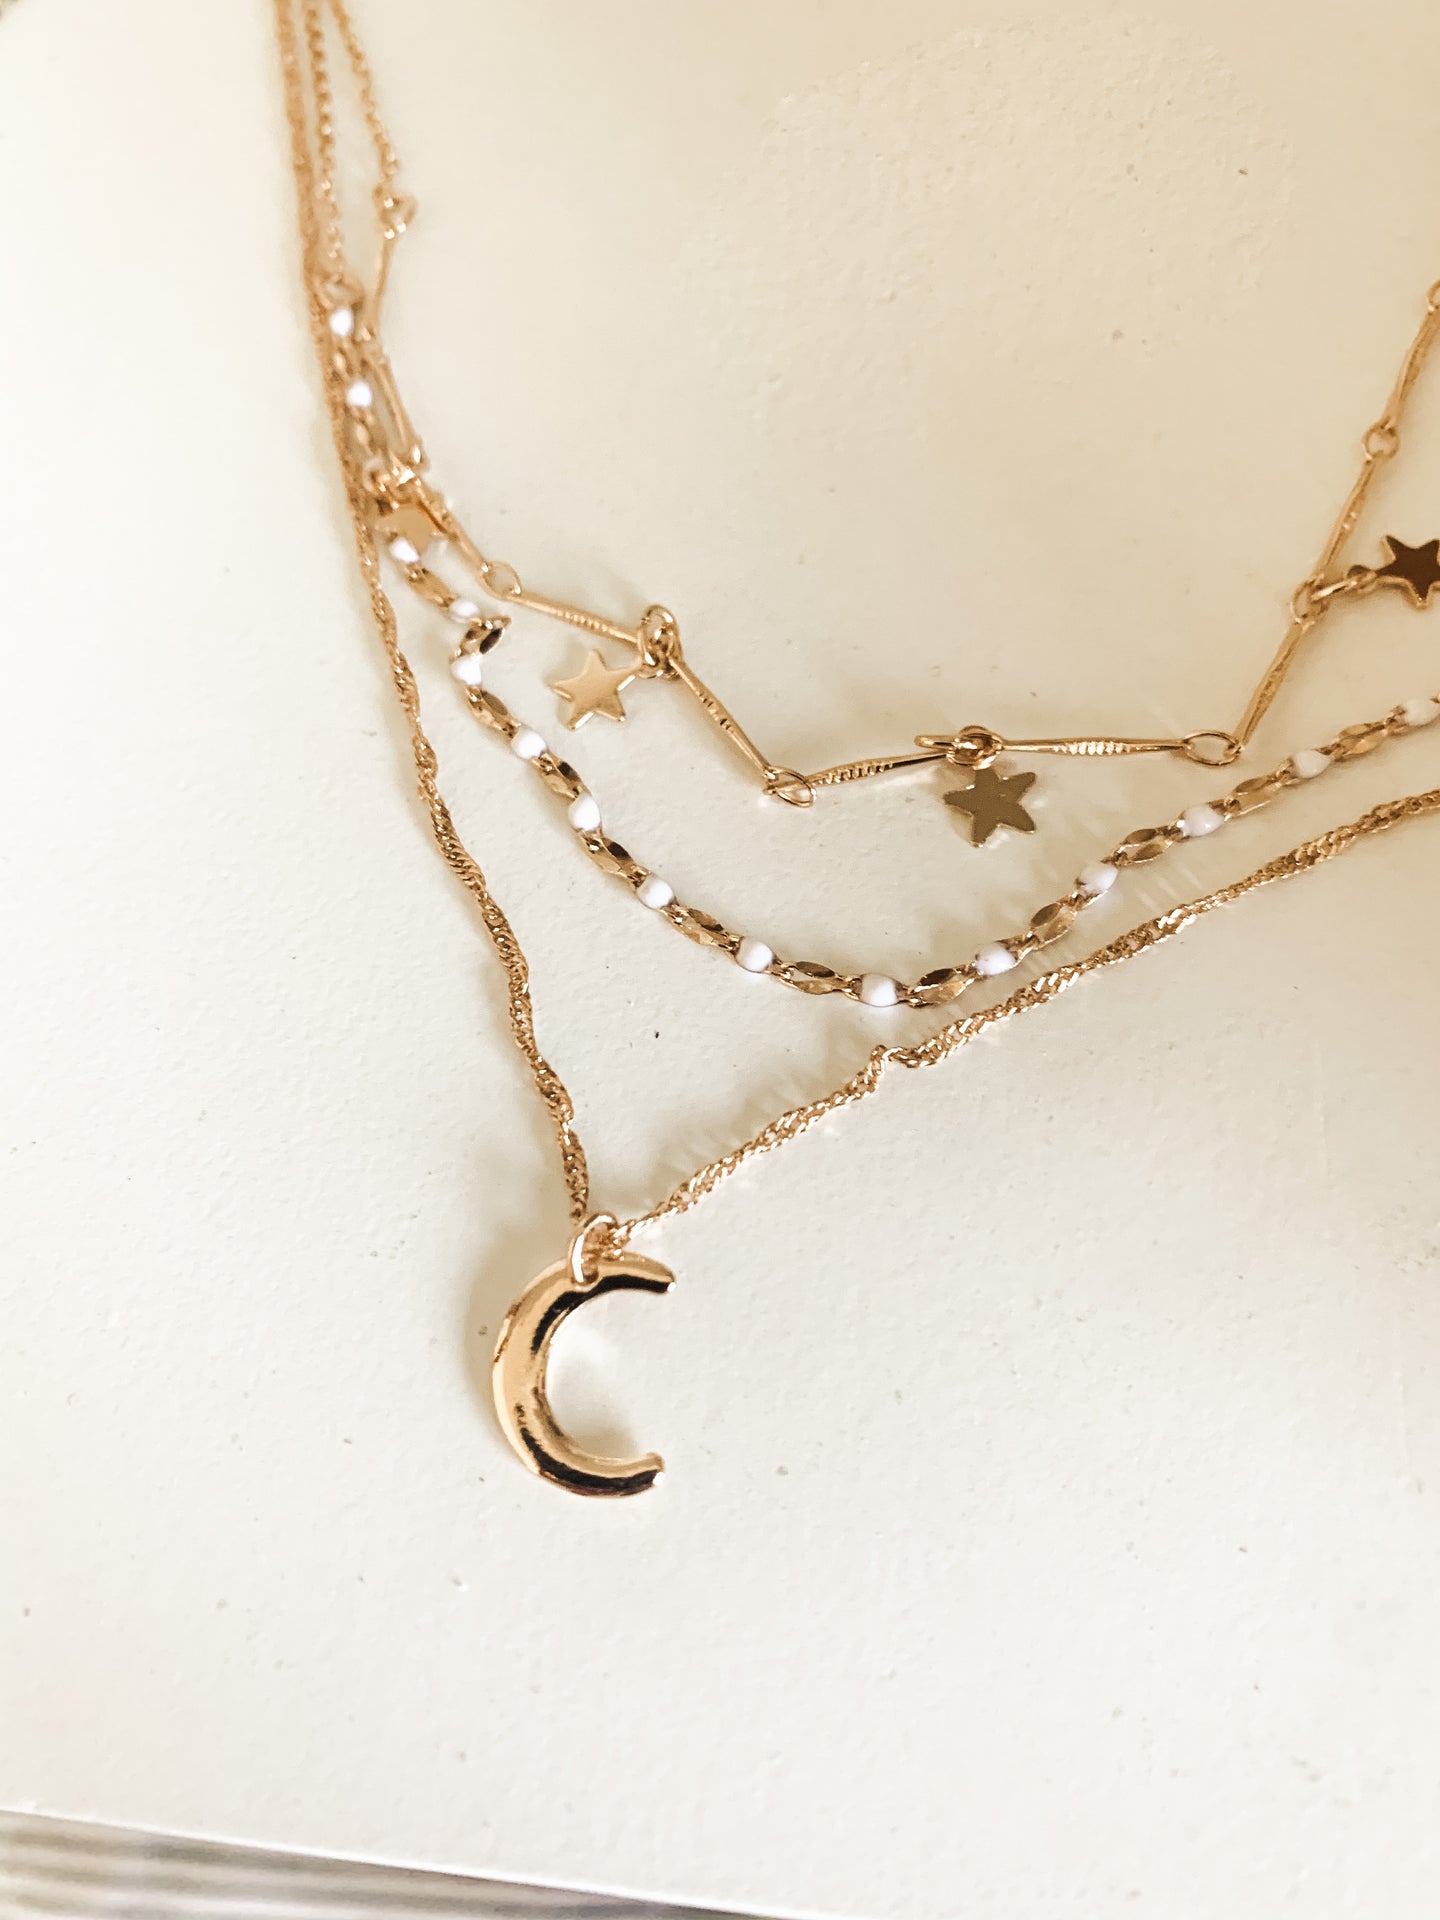 The Stars and Moon Necklace